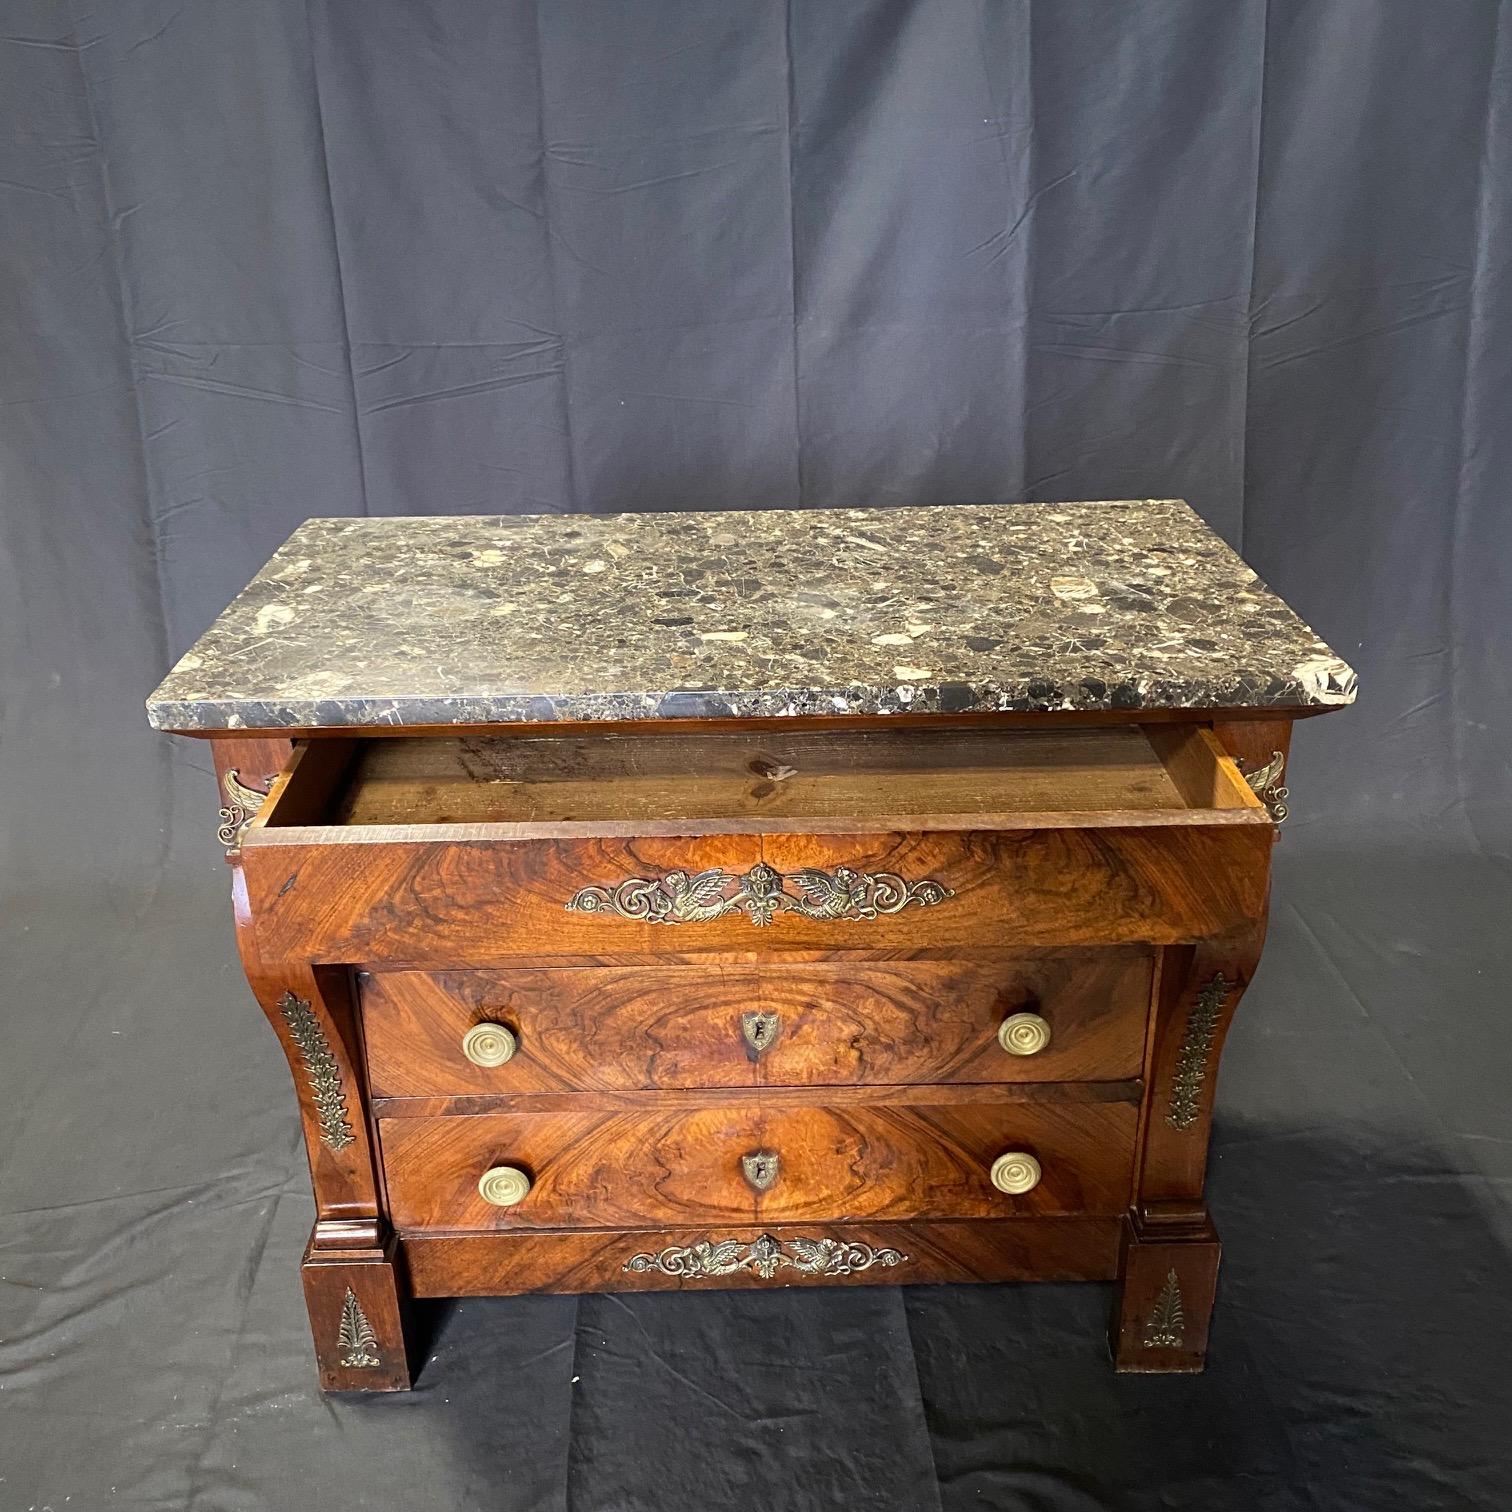 This wonderful Empire mahogany commode was hand crafted in 19th century France; four drawers and neoclassical details comprise this outstanding chest of drawers or commode. This case piece is topped with an interesting piece of black, gray and white